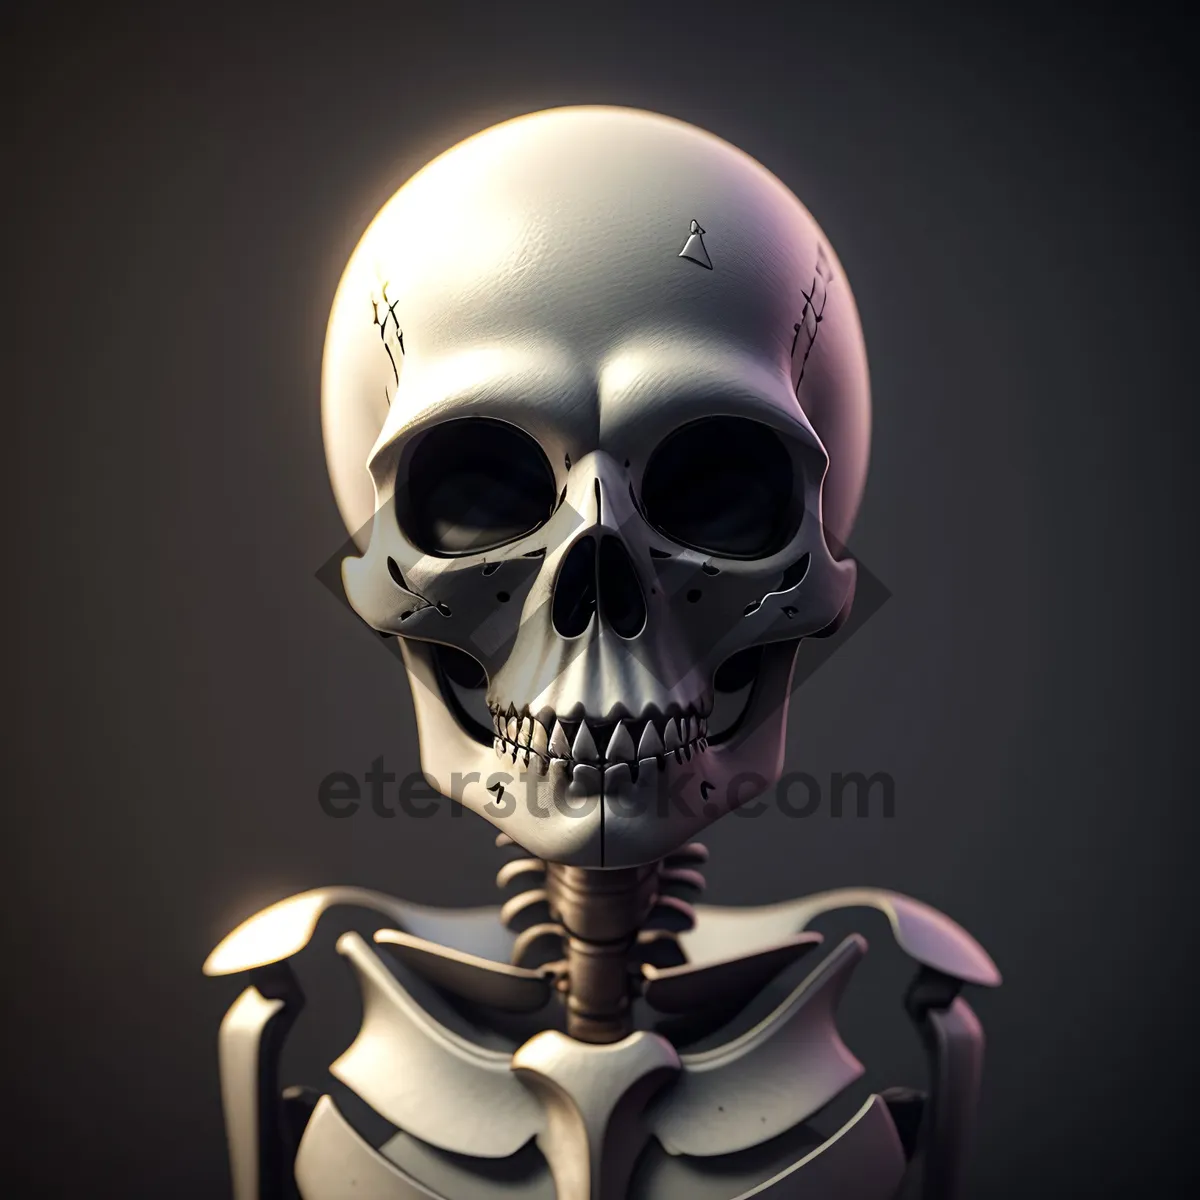 Picture of Pirate Skull Sculpture: Spooky, Scary Anatomy of Fear